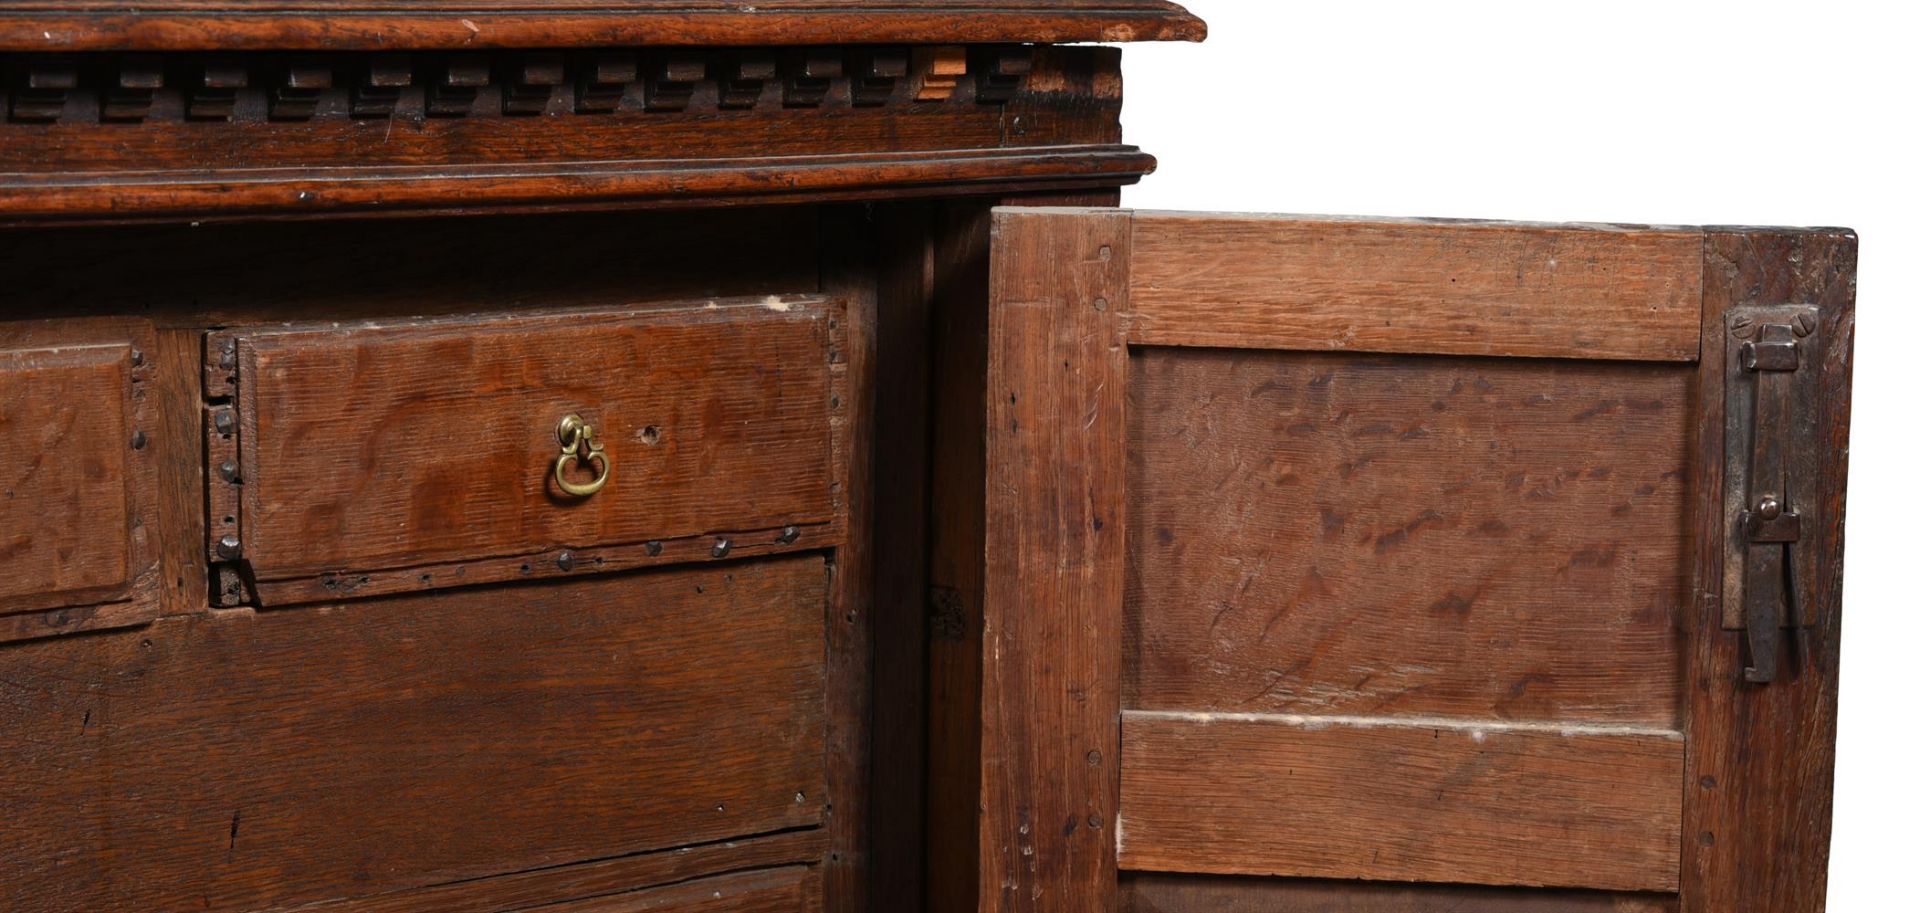 AN UNUSUAL COMMONWEALTH OAK ENCLOSED CHEST OF DRAWERS, CIRCA 1650 AND LATER - Image 4 of 4